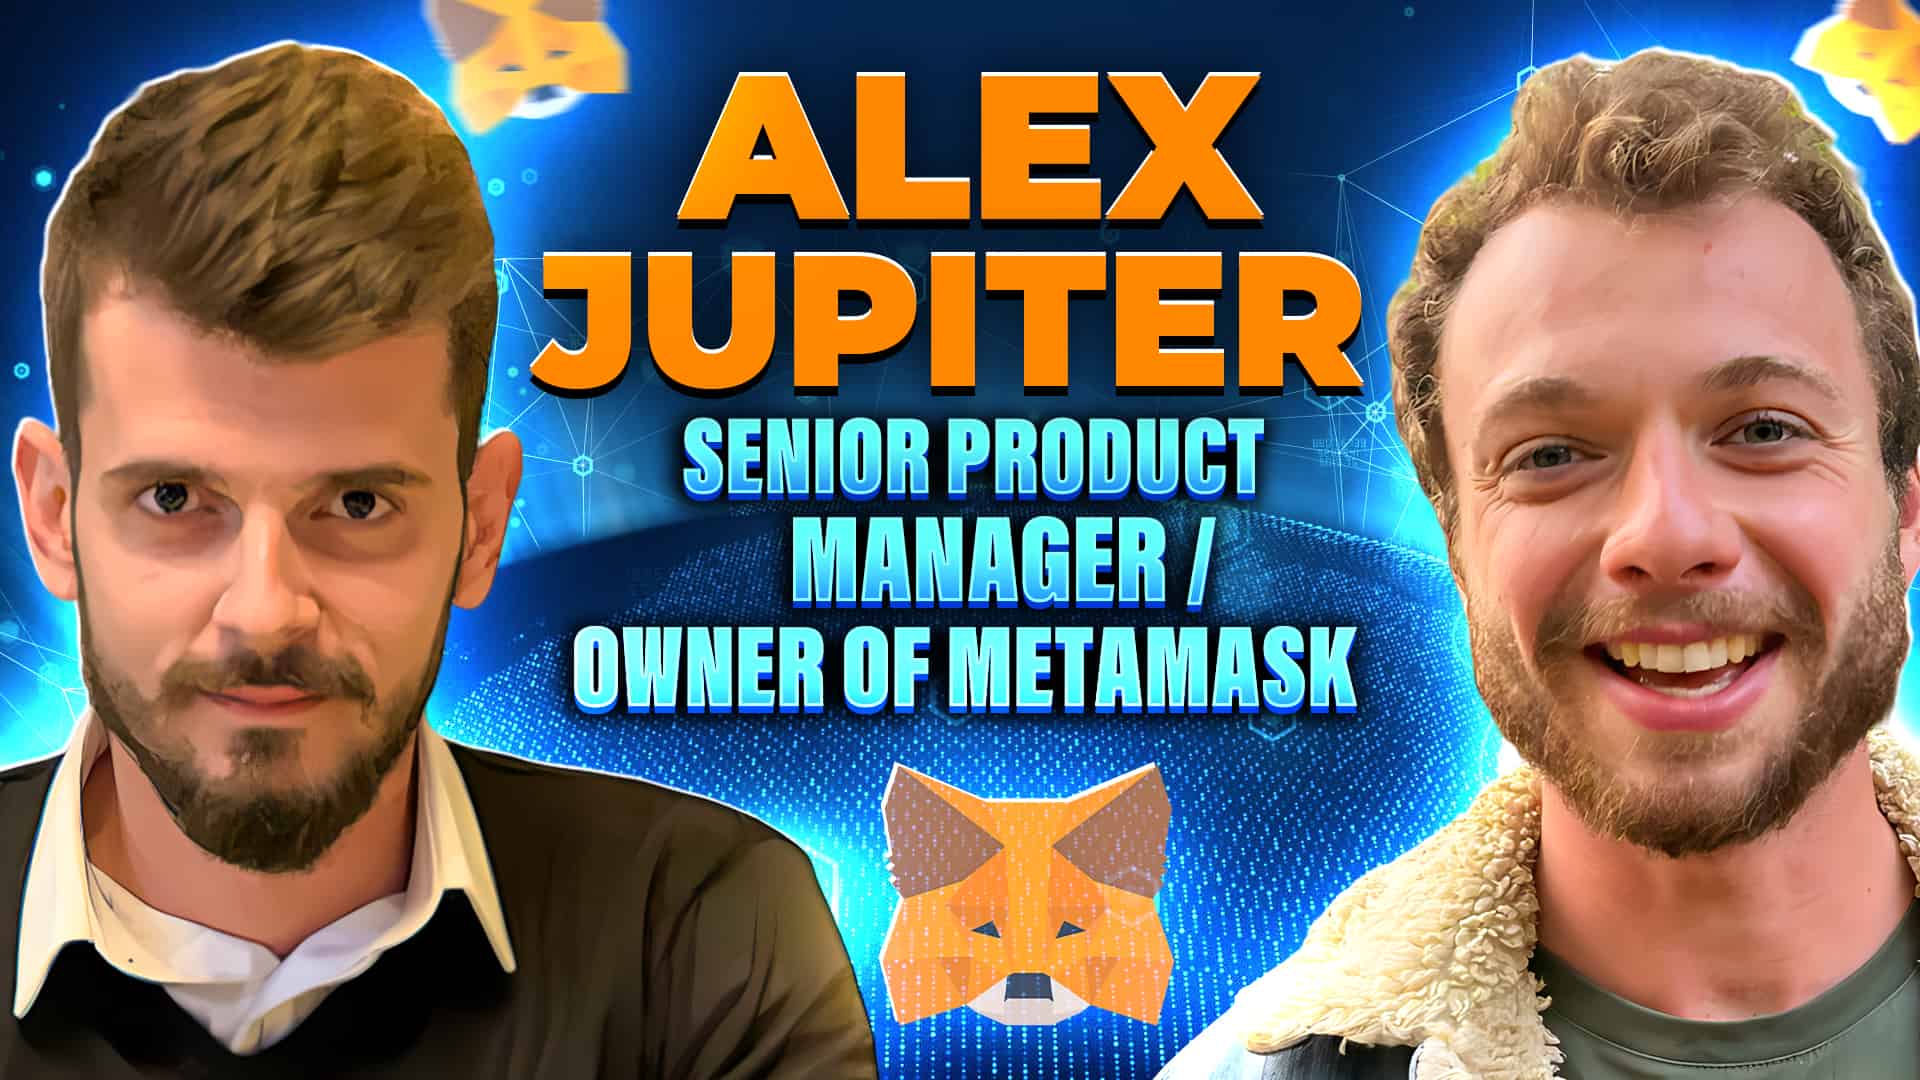 MetaMask’s Token Will Probably Not Be What You Expected: Talking Wallets With PM Alex Jupiter